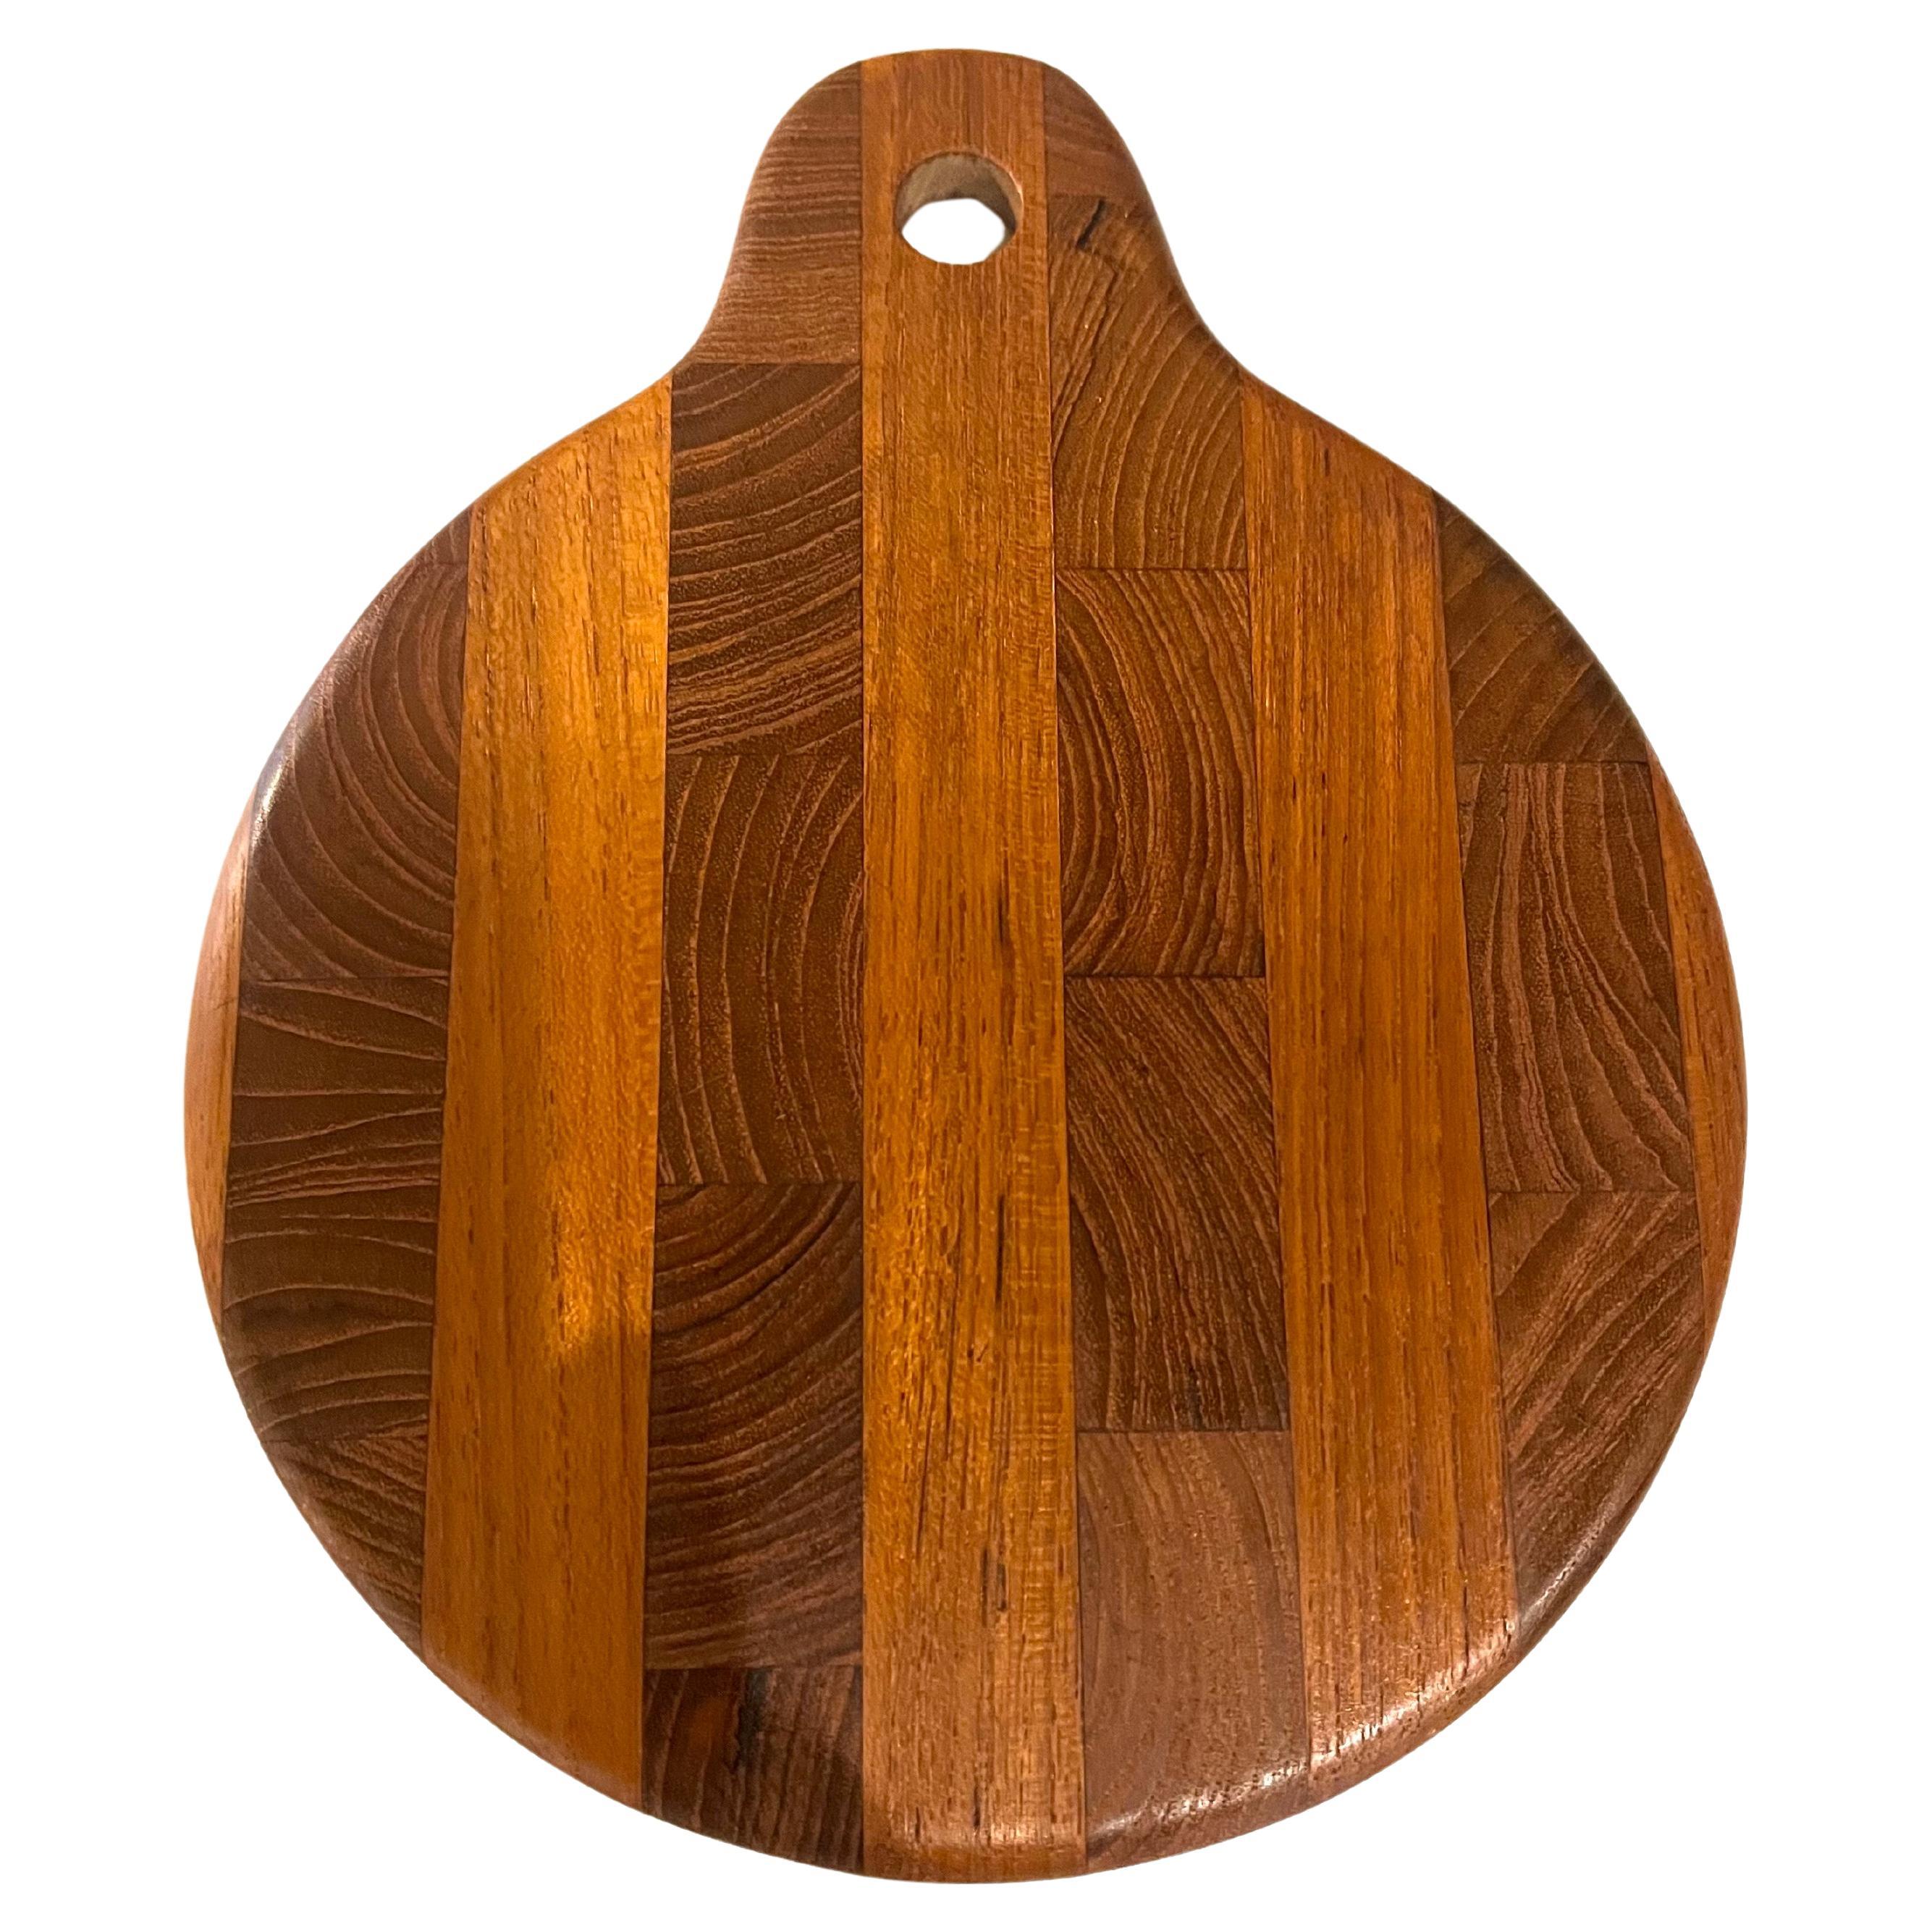 Petite solid teak butcher block serving tray great for cheese & crackers , elegant simple design easy to store or hang in the wall.